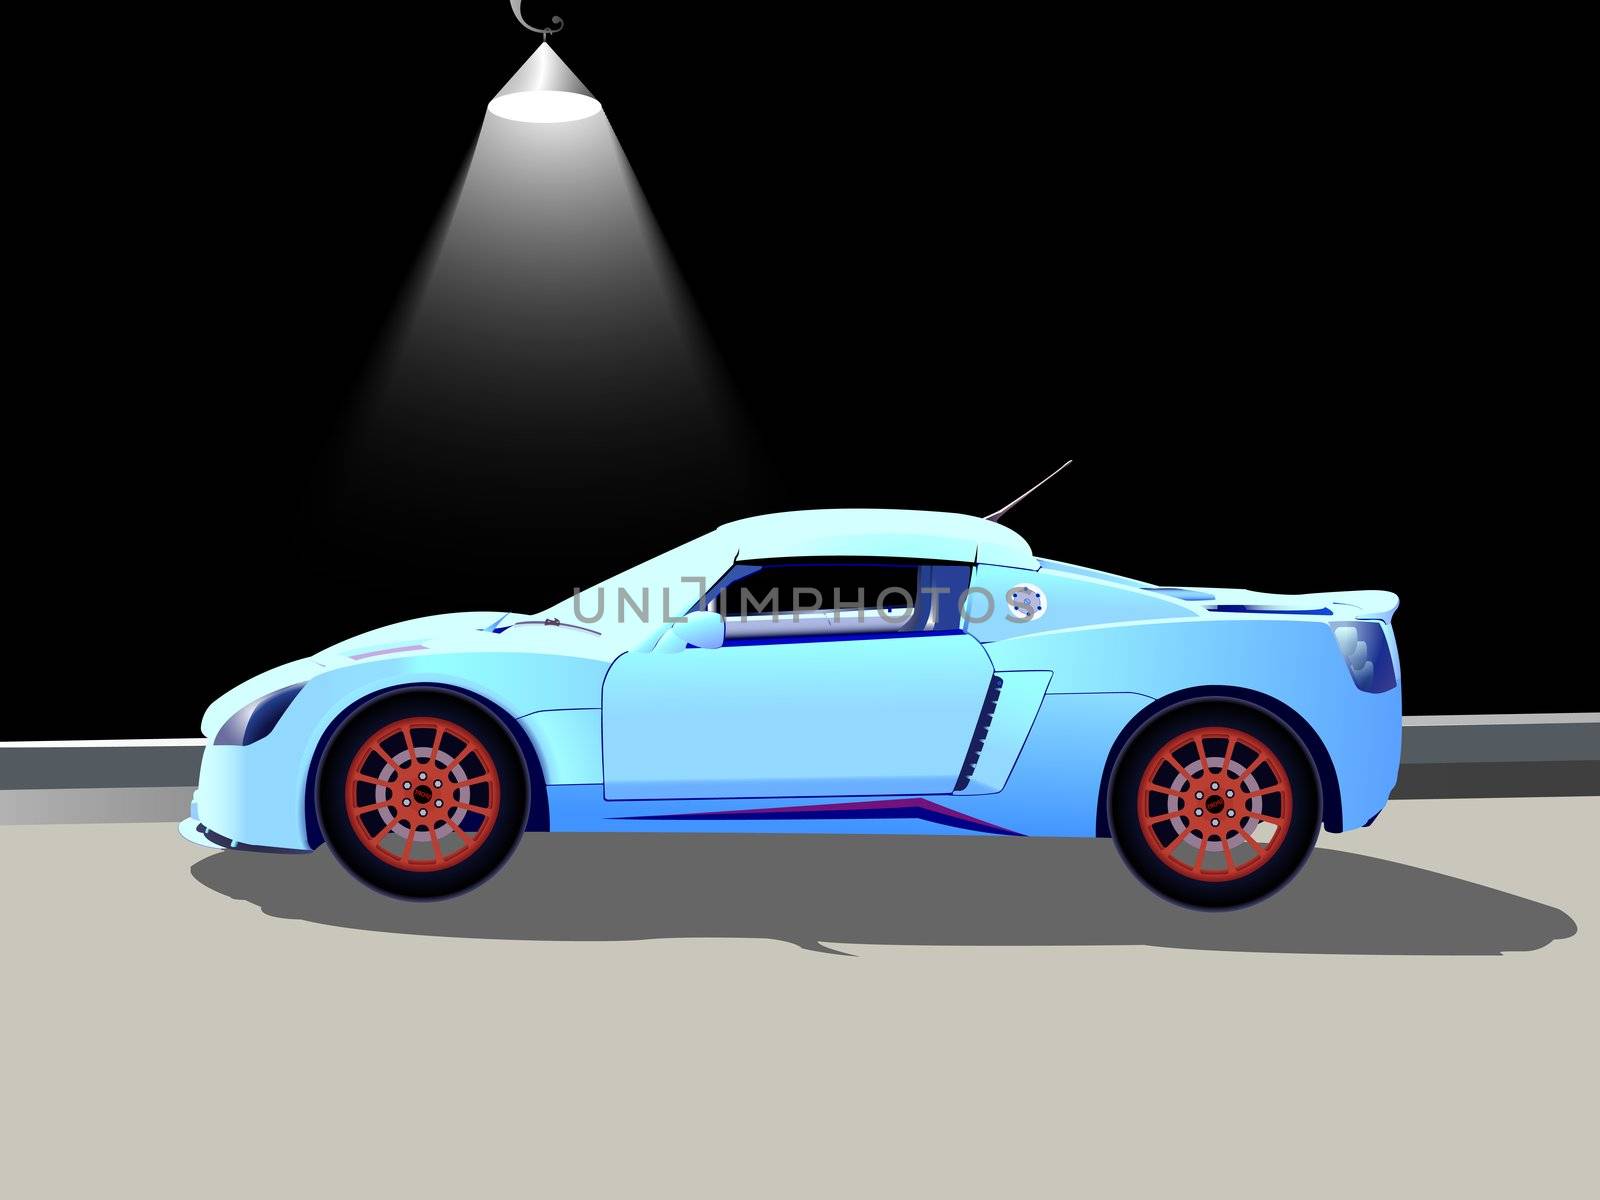 sport car and street lamp, abstract vector art illustration